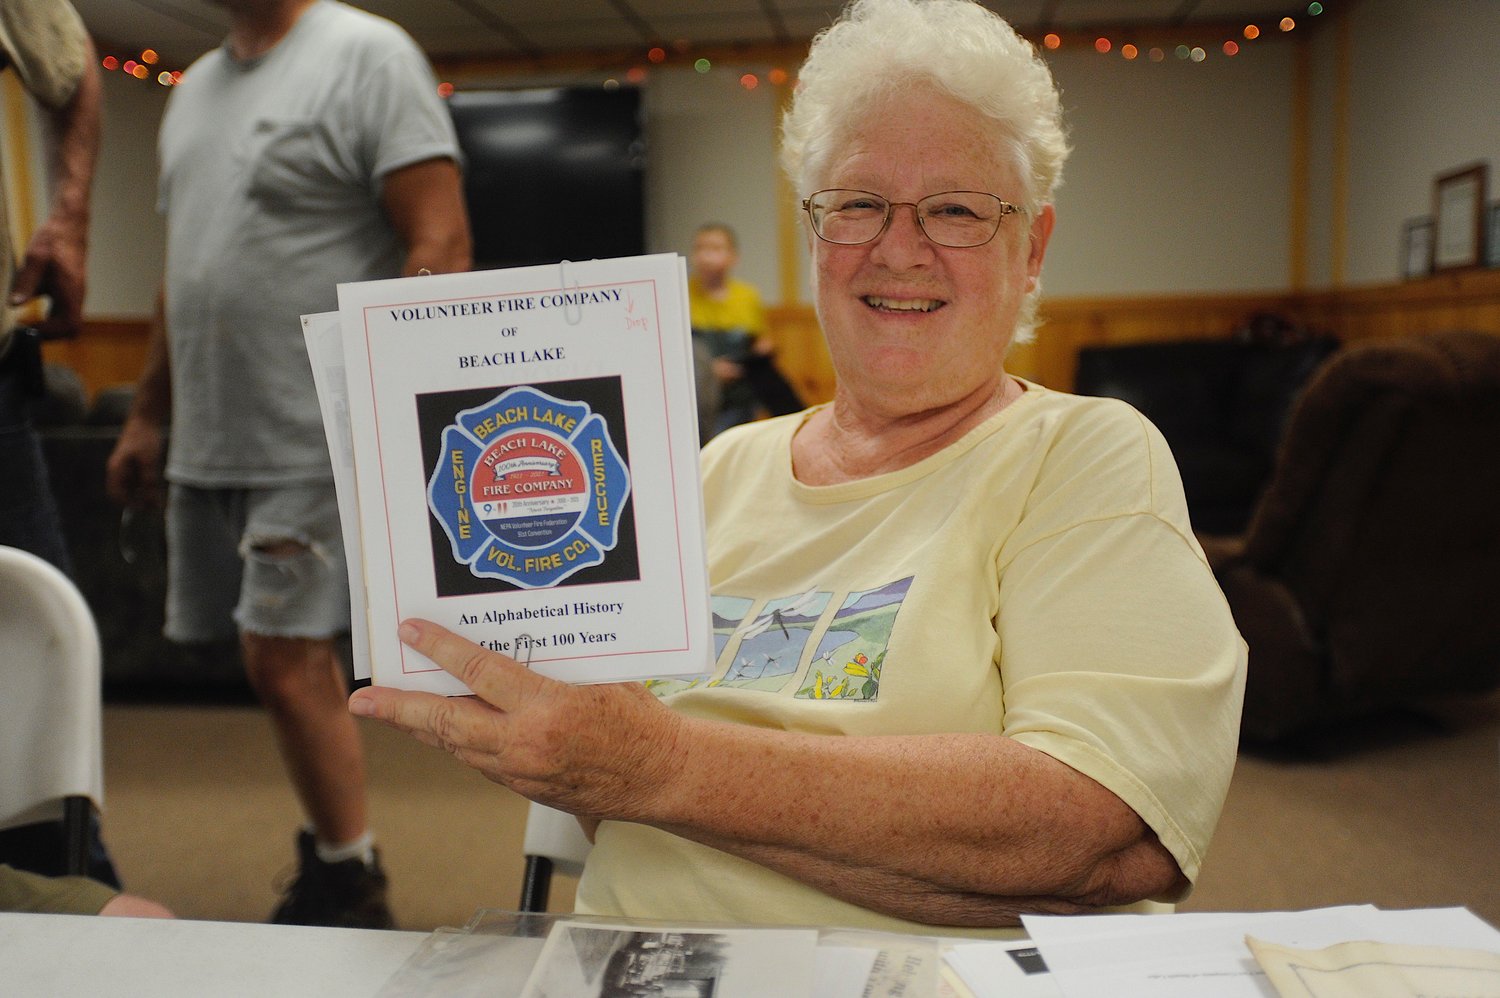 Carol Henry Dunn, Berlin Township historian and chronicler of events at the Volunteer Fire Company of Beach Lake, displays a mock-up of the 100th Anniversary souvenir pamphlet, just a few days before it went to press.